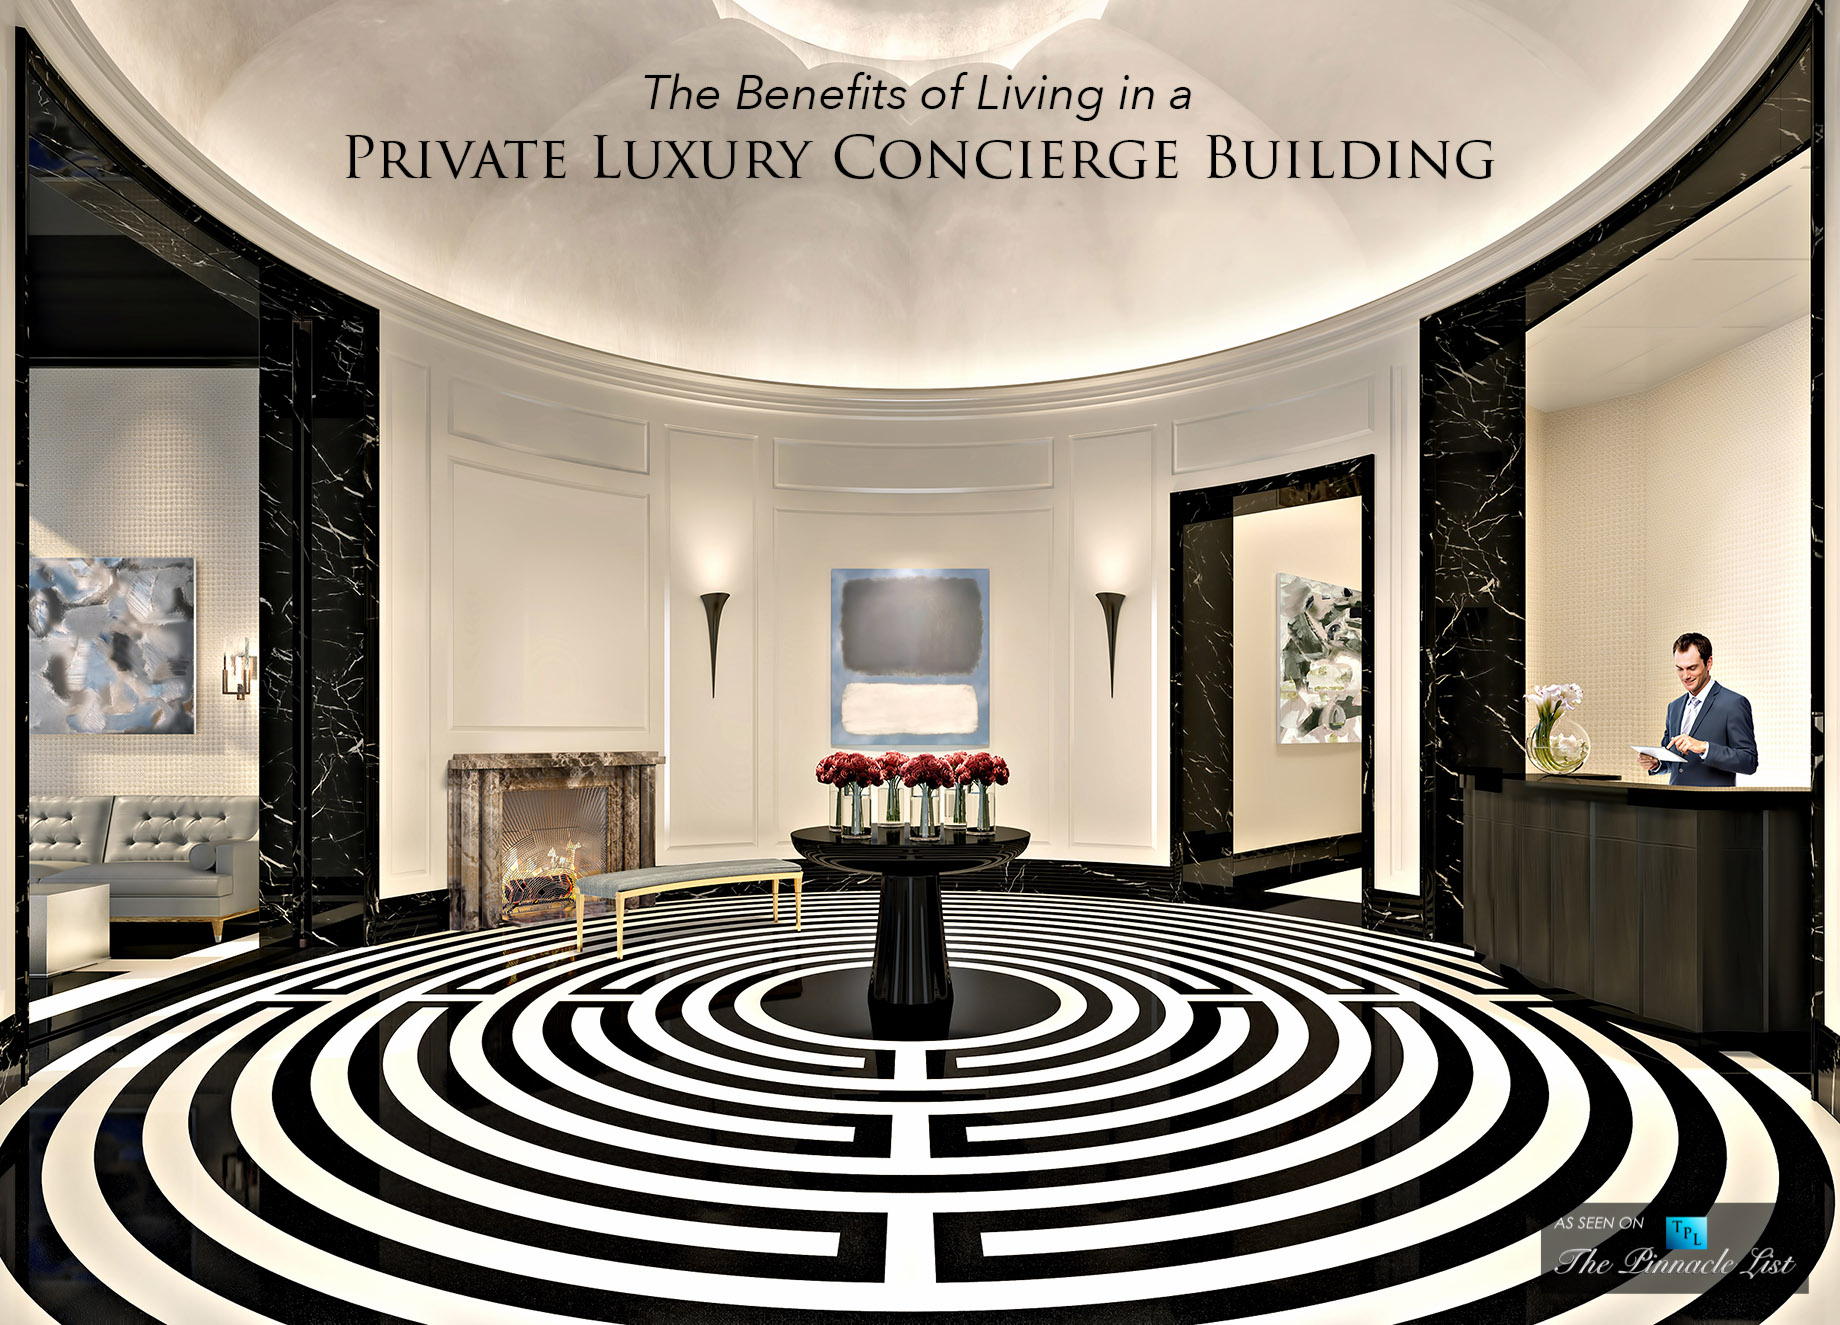 The Benefits of Living in a Private Luxury Concierge Building